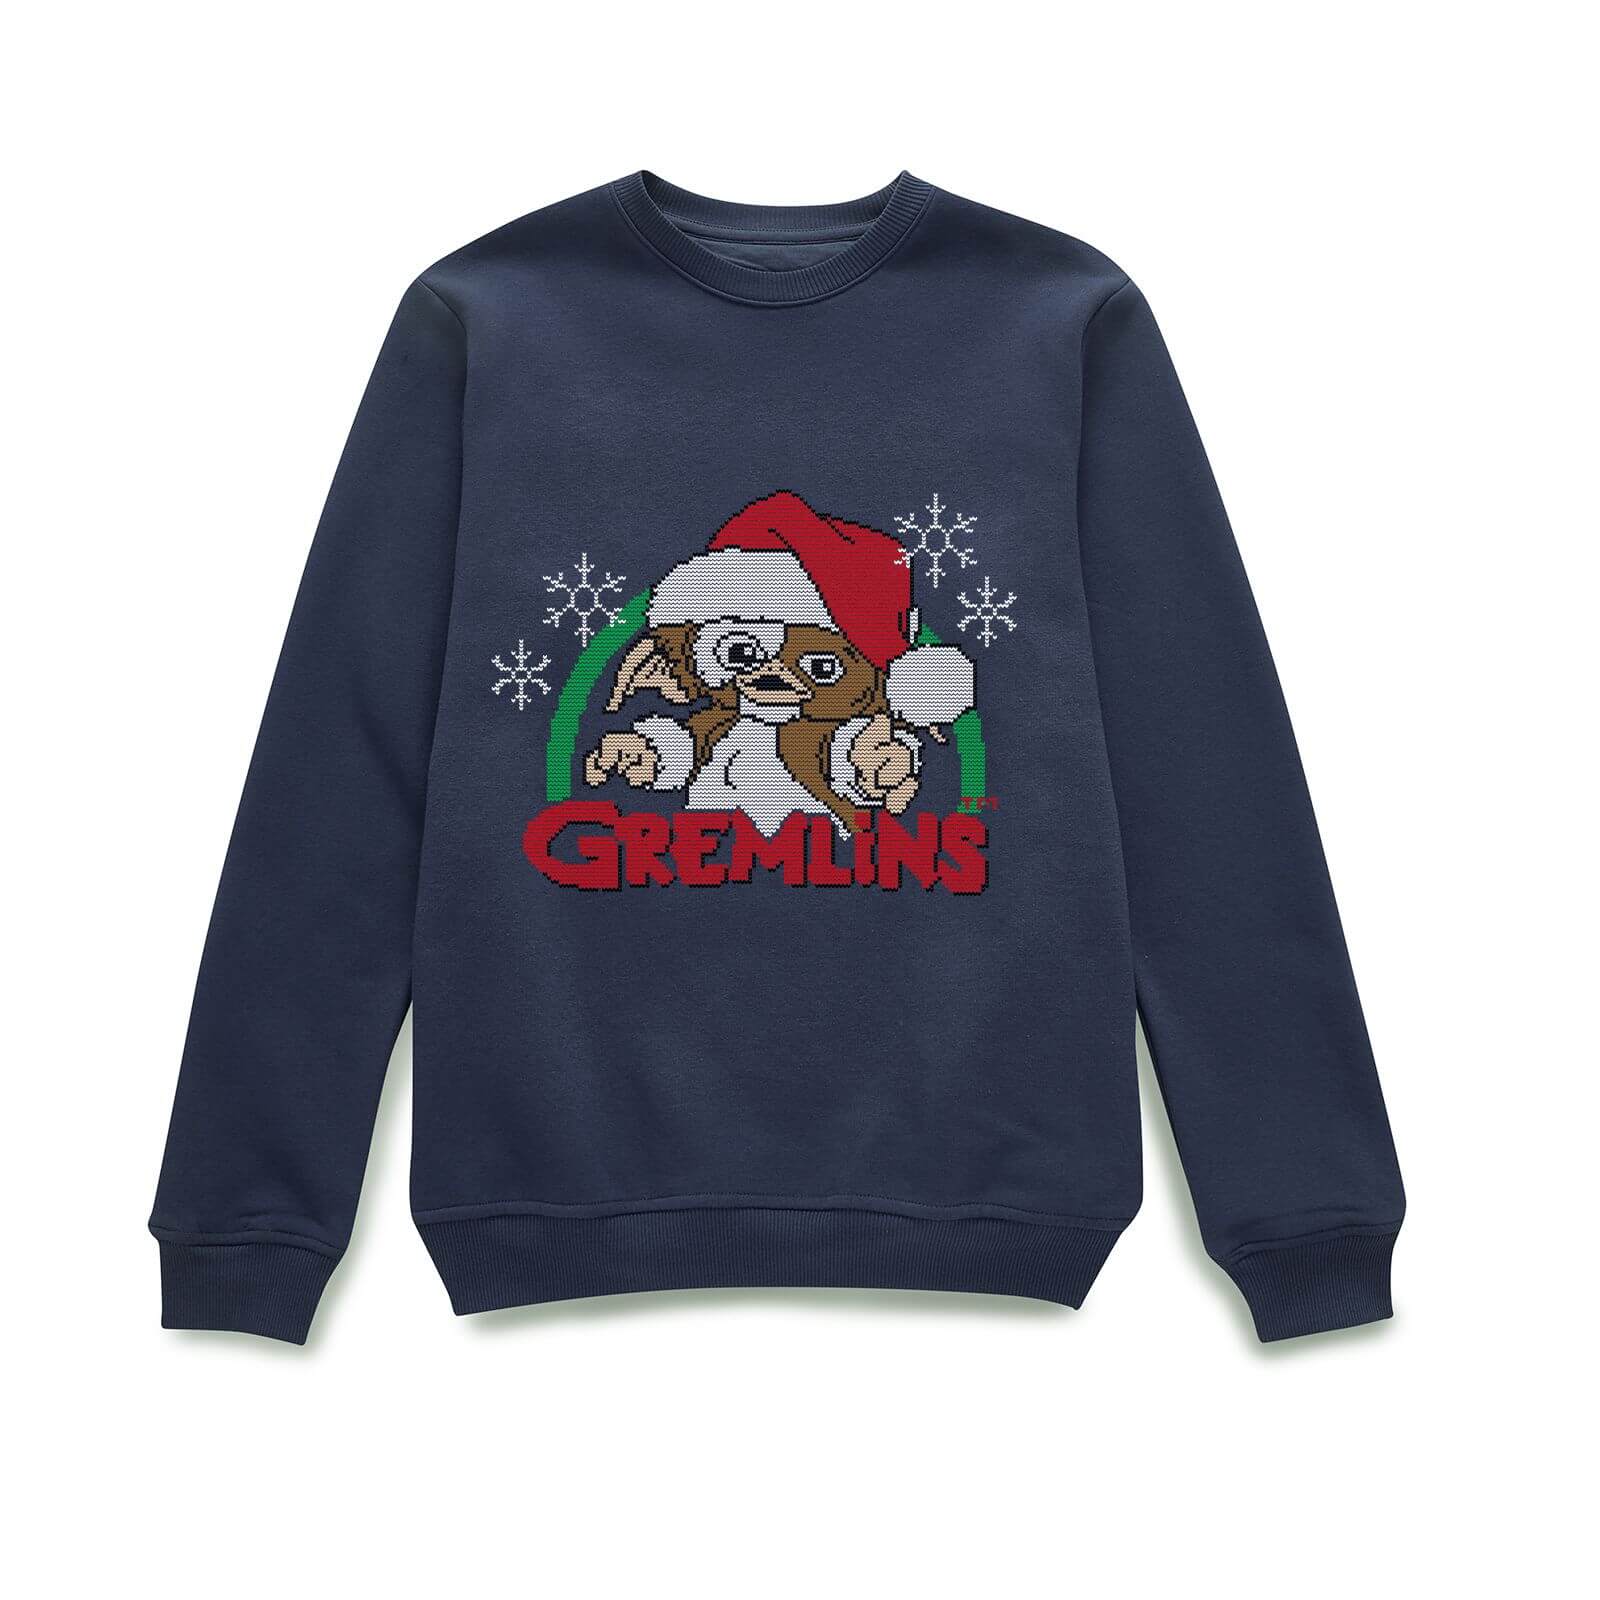 Gremlins Another Reason To Hate Christmas Jumper - Navy - XL - Navy blauw product